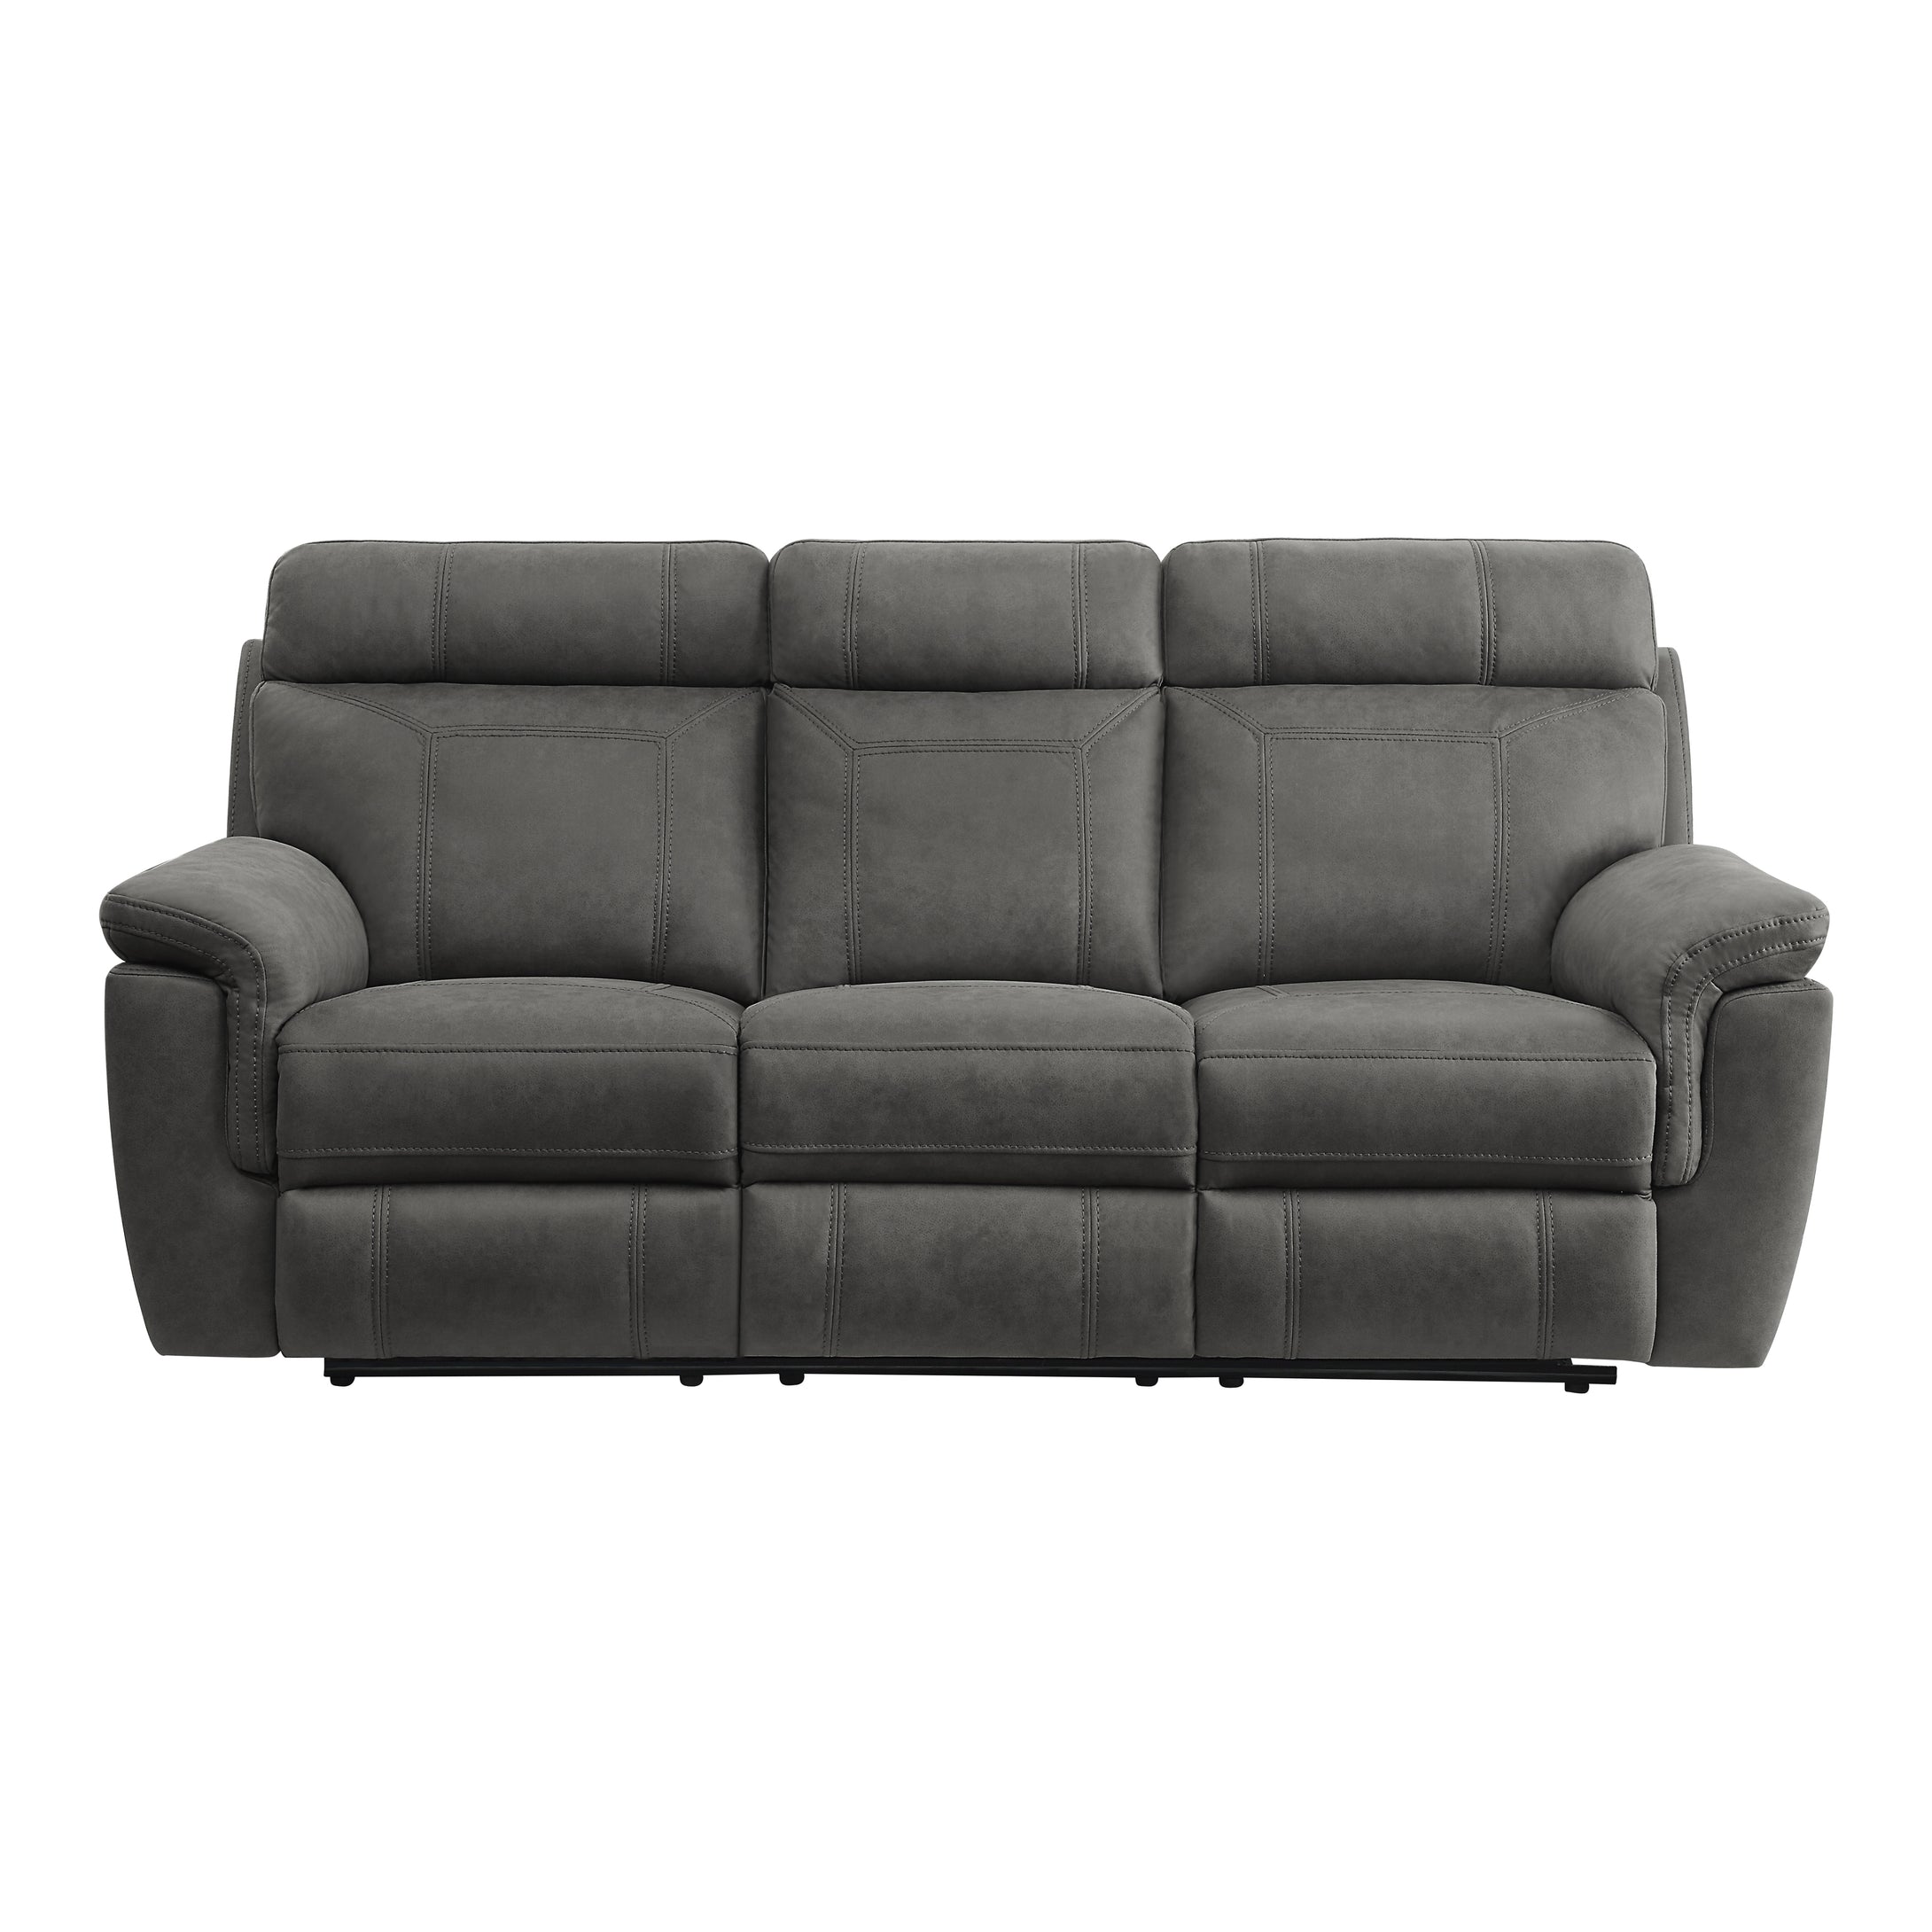 9301GRY-3 Double Reclining Sofa with Drop-Down Cup Holders